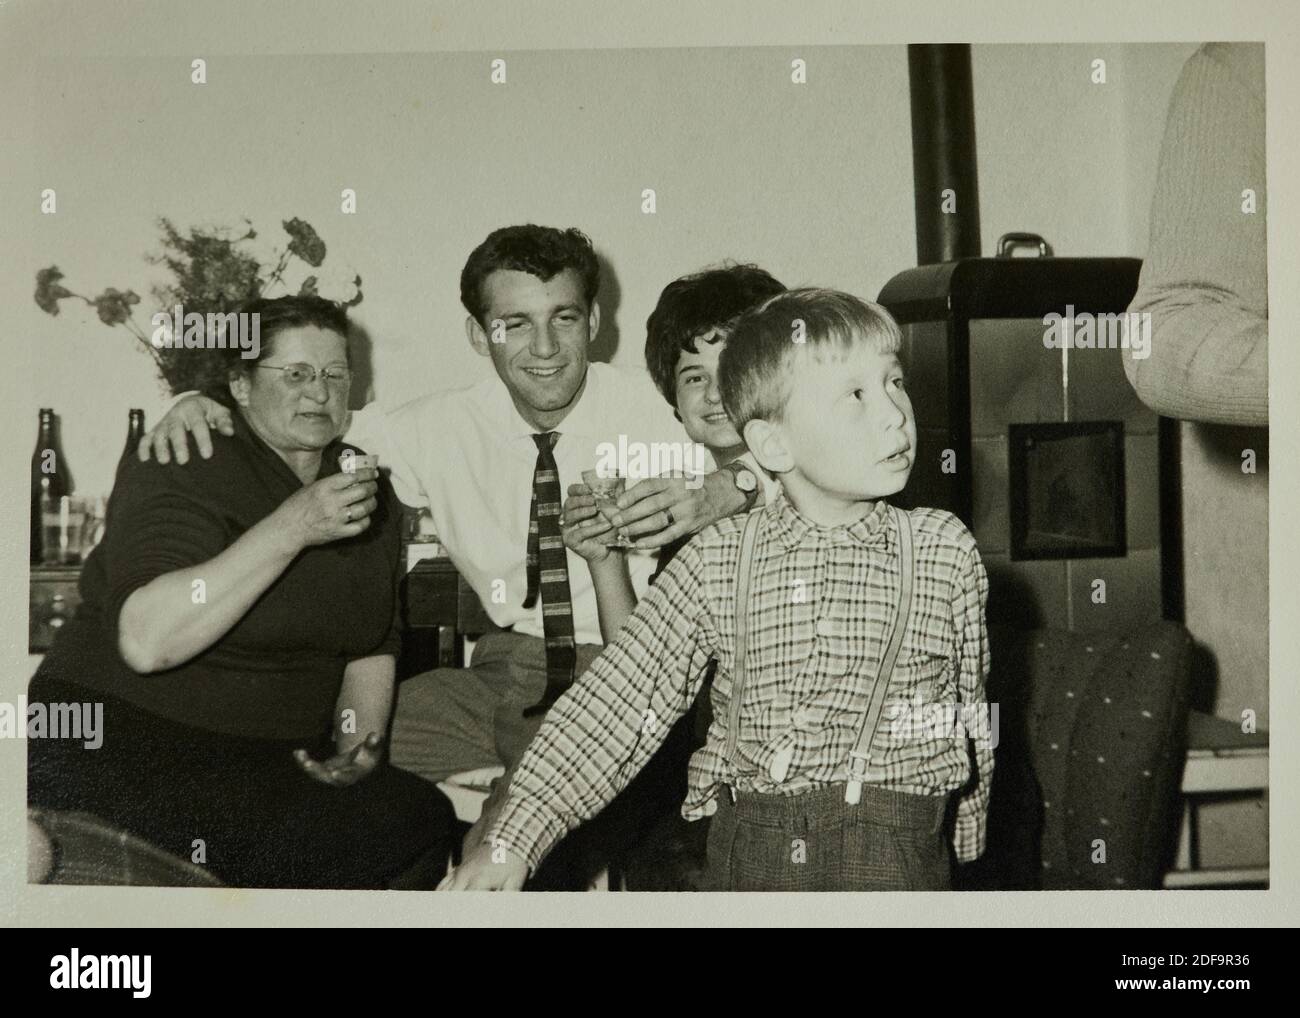 Historical Photo:  Family members 4.4.1961 in the living room with an old oven, celebrating engagement. Reproduction in Marktoberdorf, Germany, October 26, 2020.  © Peter Schatz / Alamy Stock Photos Stock Photo